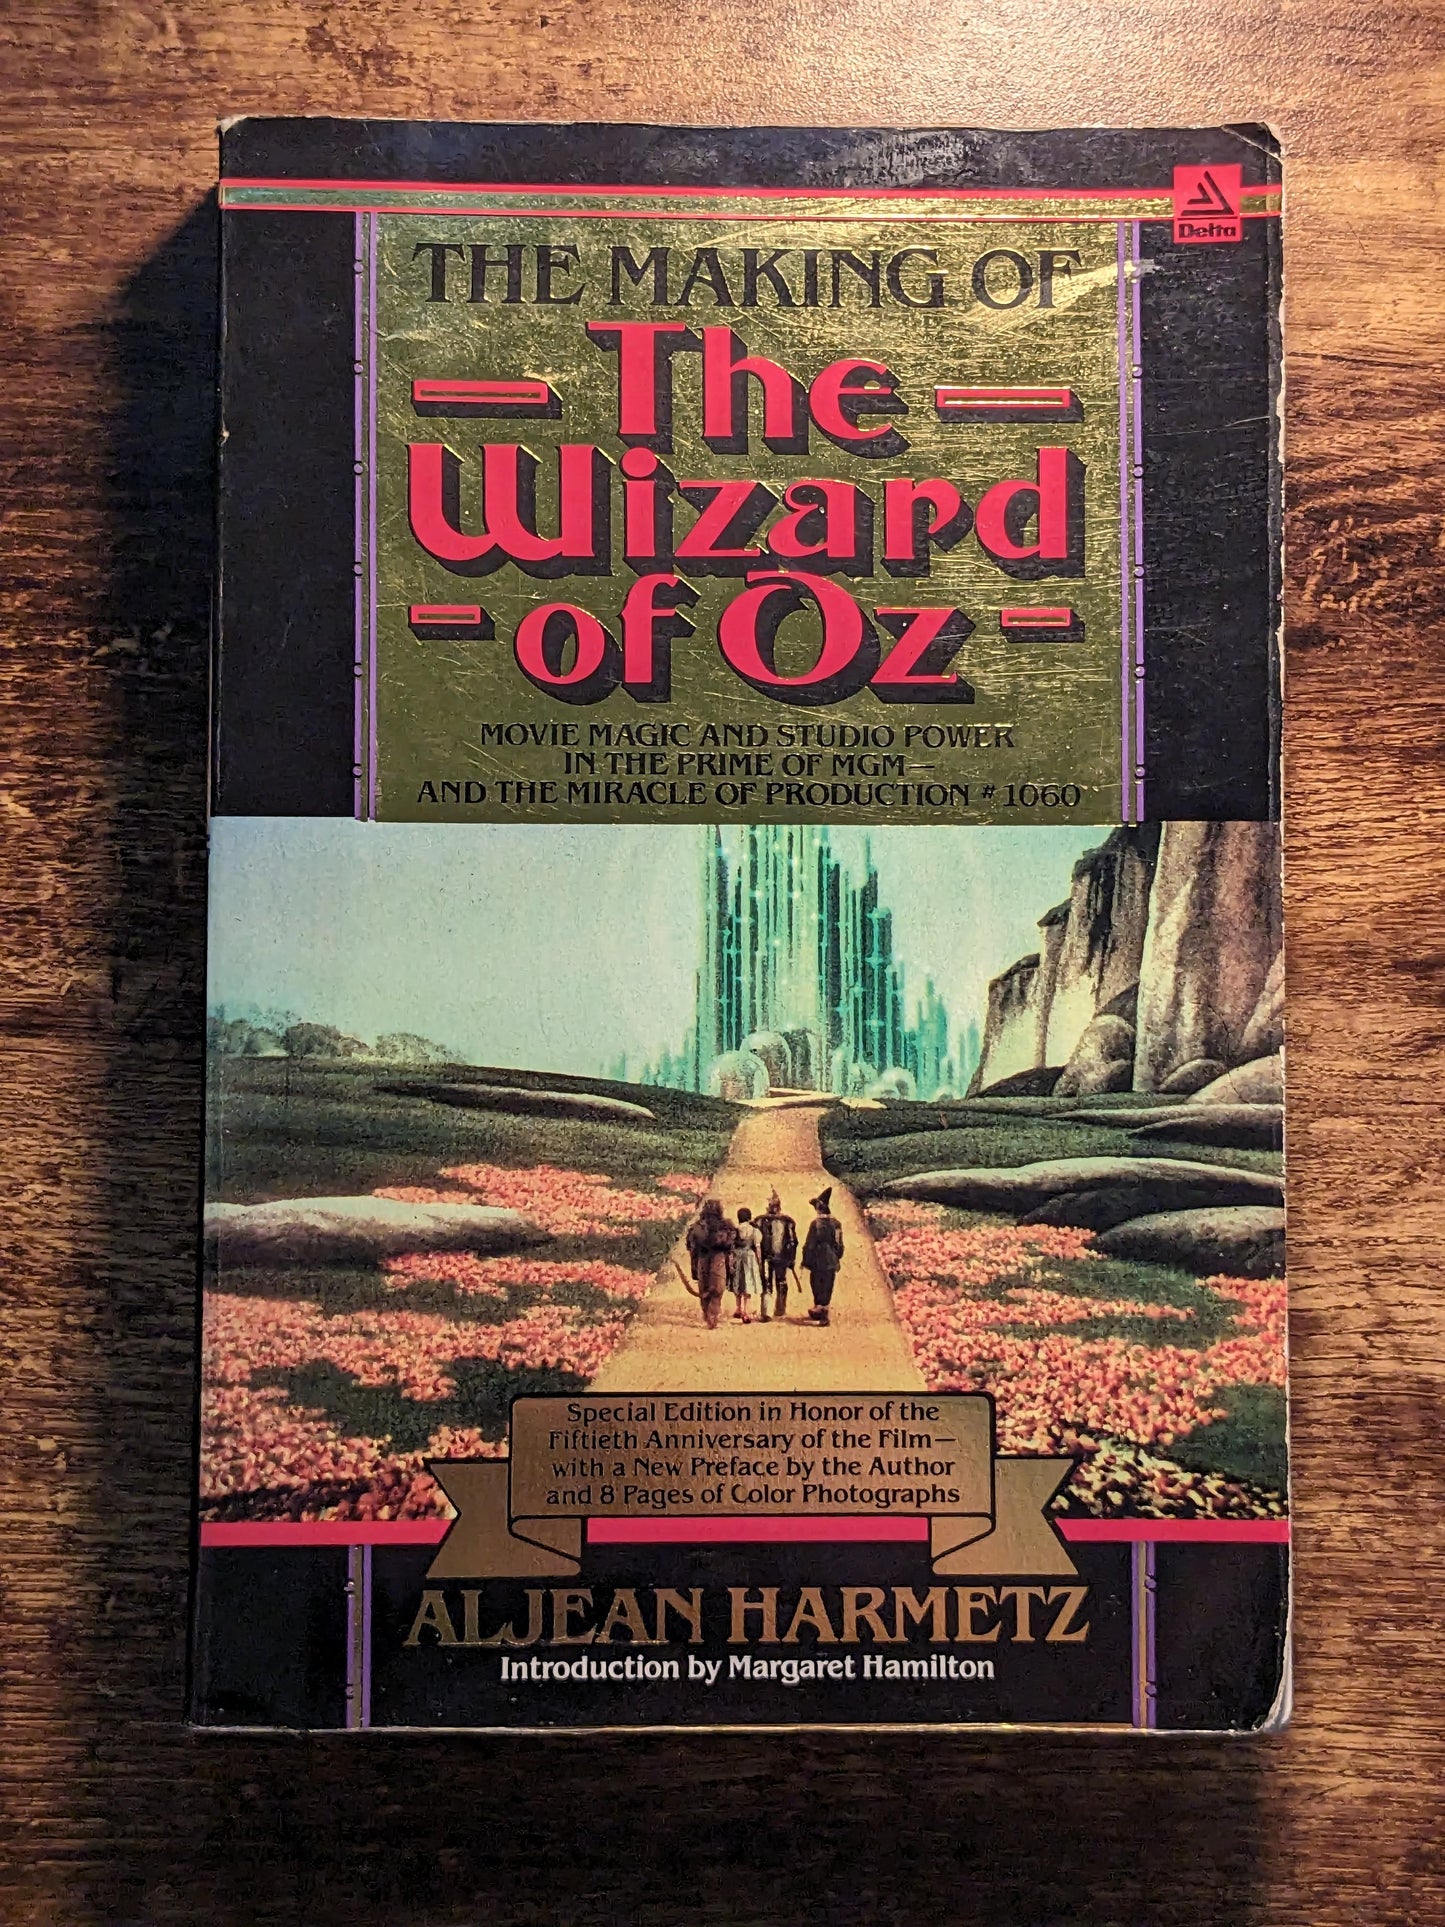 Making of the Wizard of Oz, The: Movie Magic and Studio Power in the Prime of MGM- and the Miracle of Production No. 1060 - Asylum Books